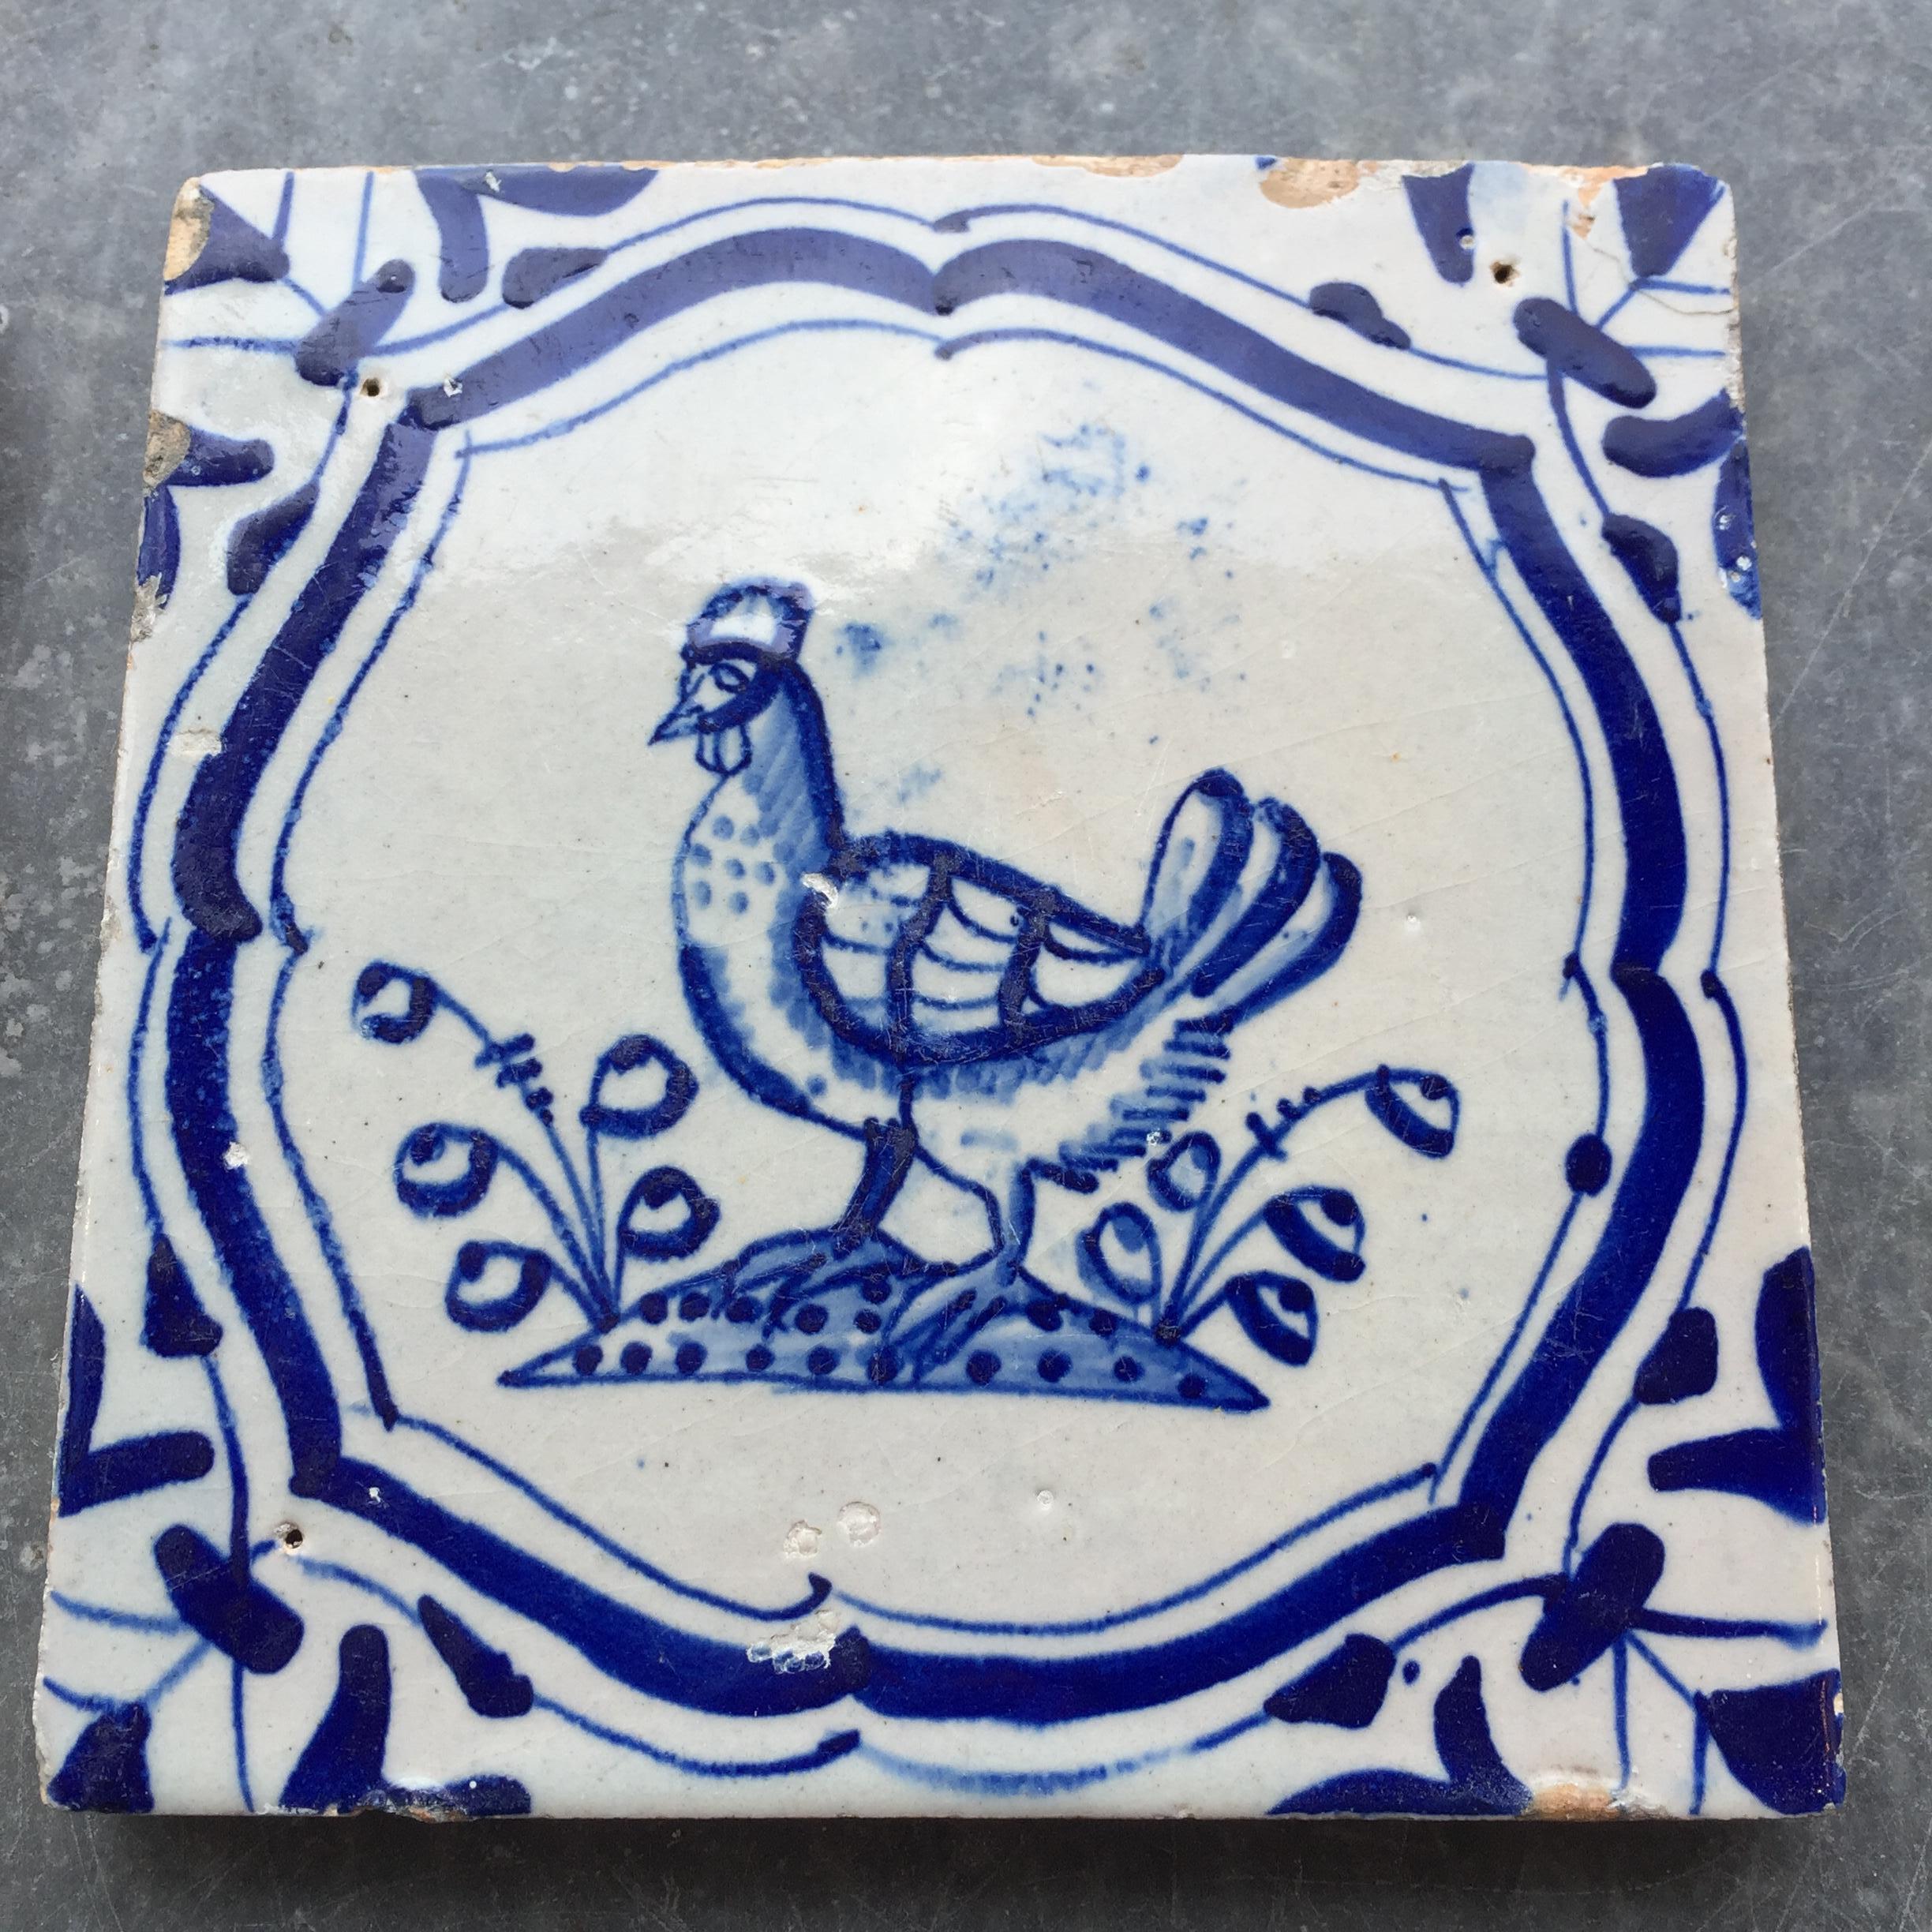 Two Rare Dutch Delft Tile with Rooster and Chicken, 17th Century 2